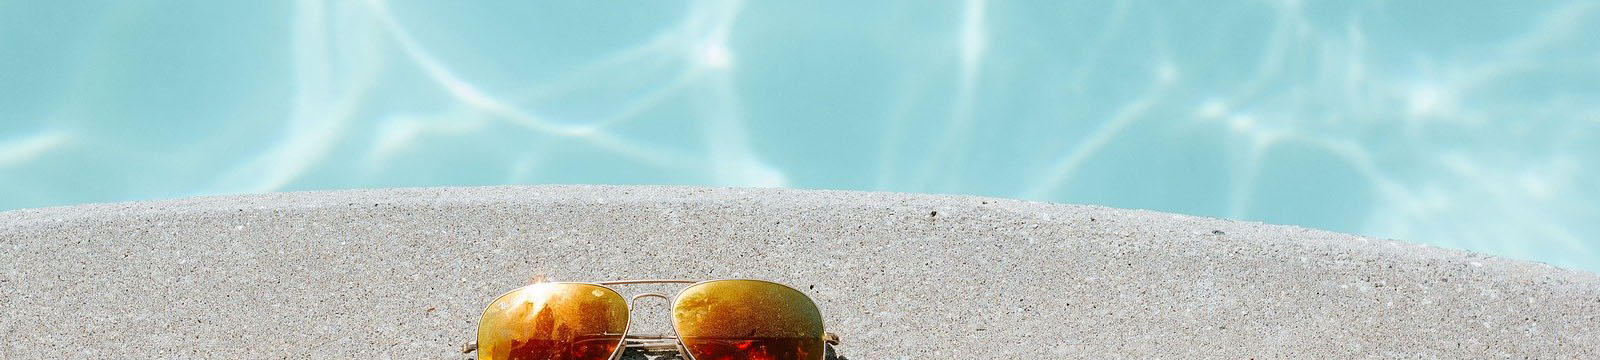 photo of swimming pool and sunglasses